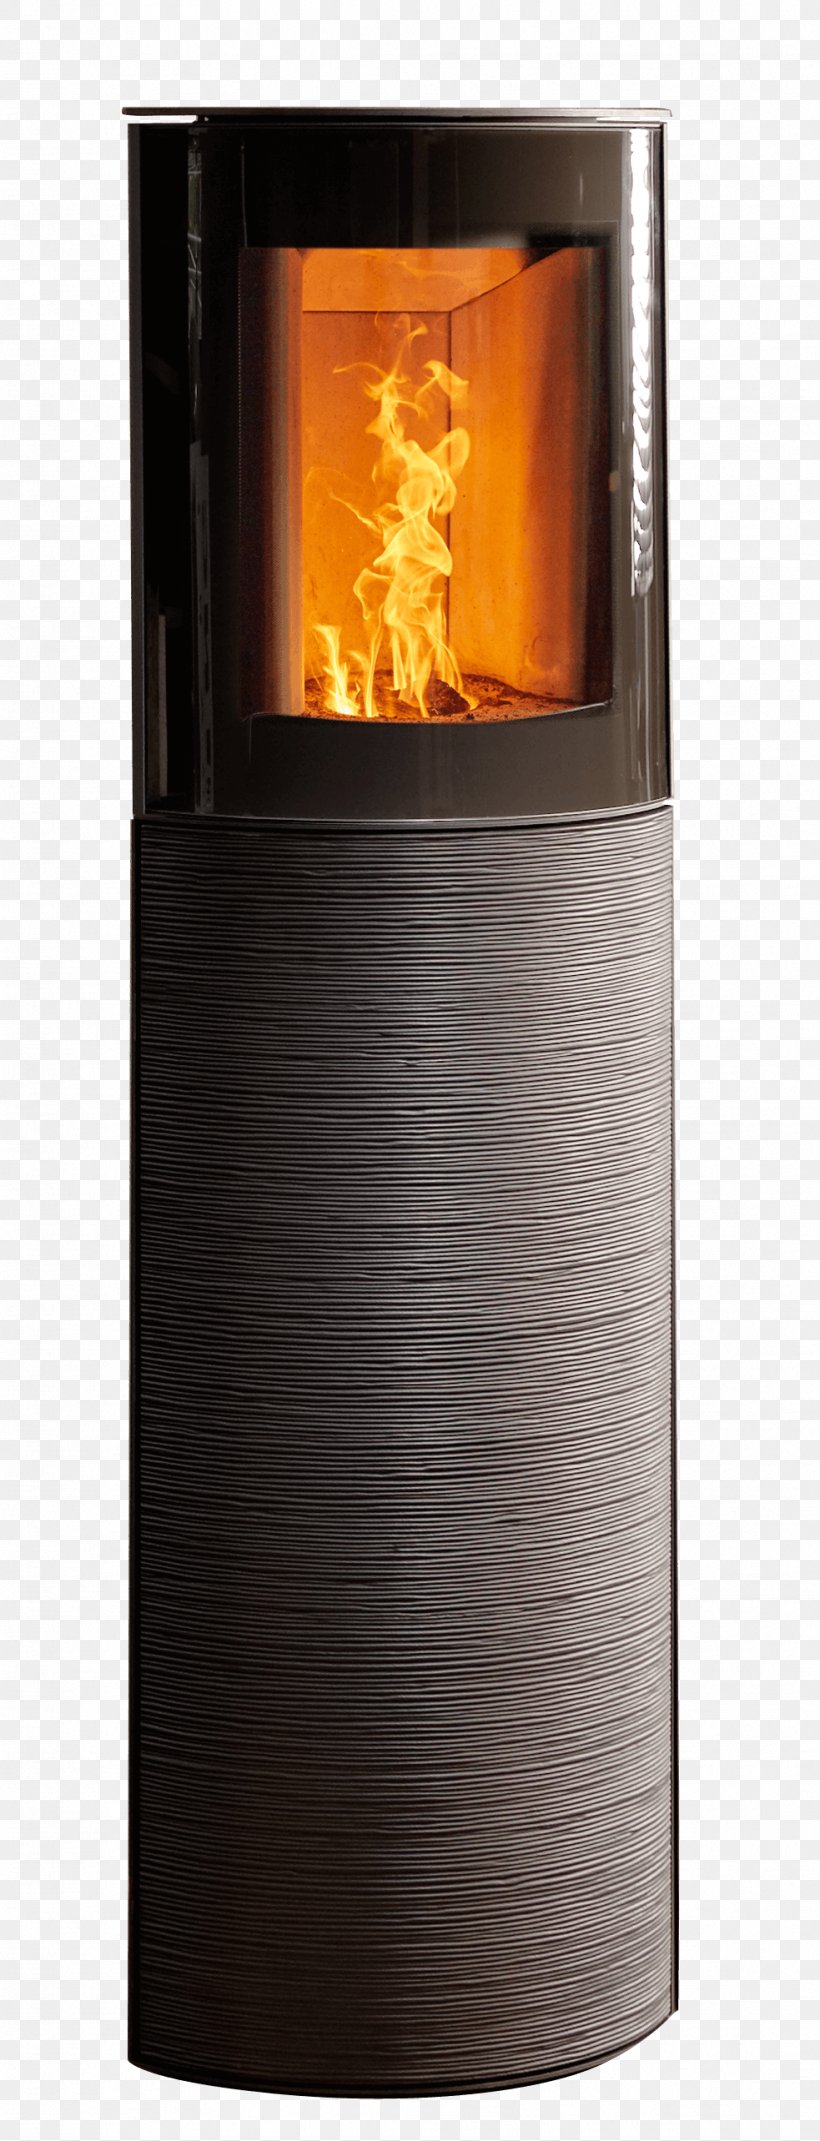 Fireplace Wood Stoves Kaminofen Austroflamm Clou Xtra Oven, PNG, 983x2567px, Fireplace, Ceramic, Firebox, Fireplace Insert, Hearth Download Free